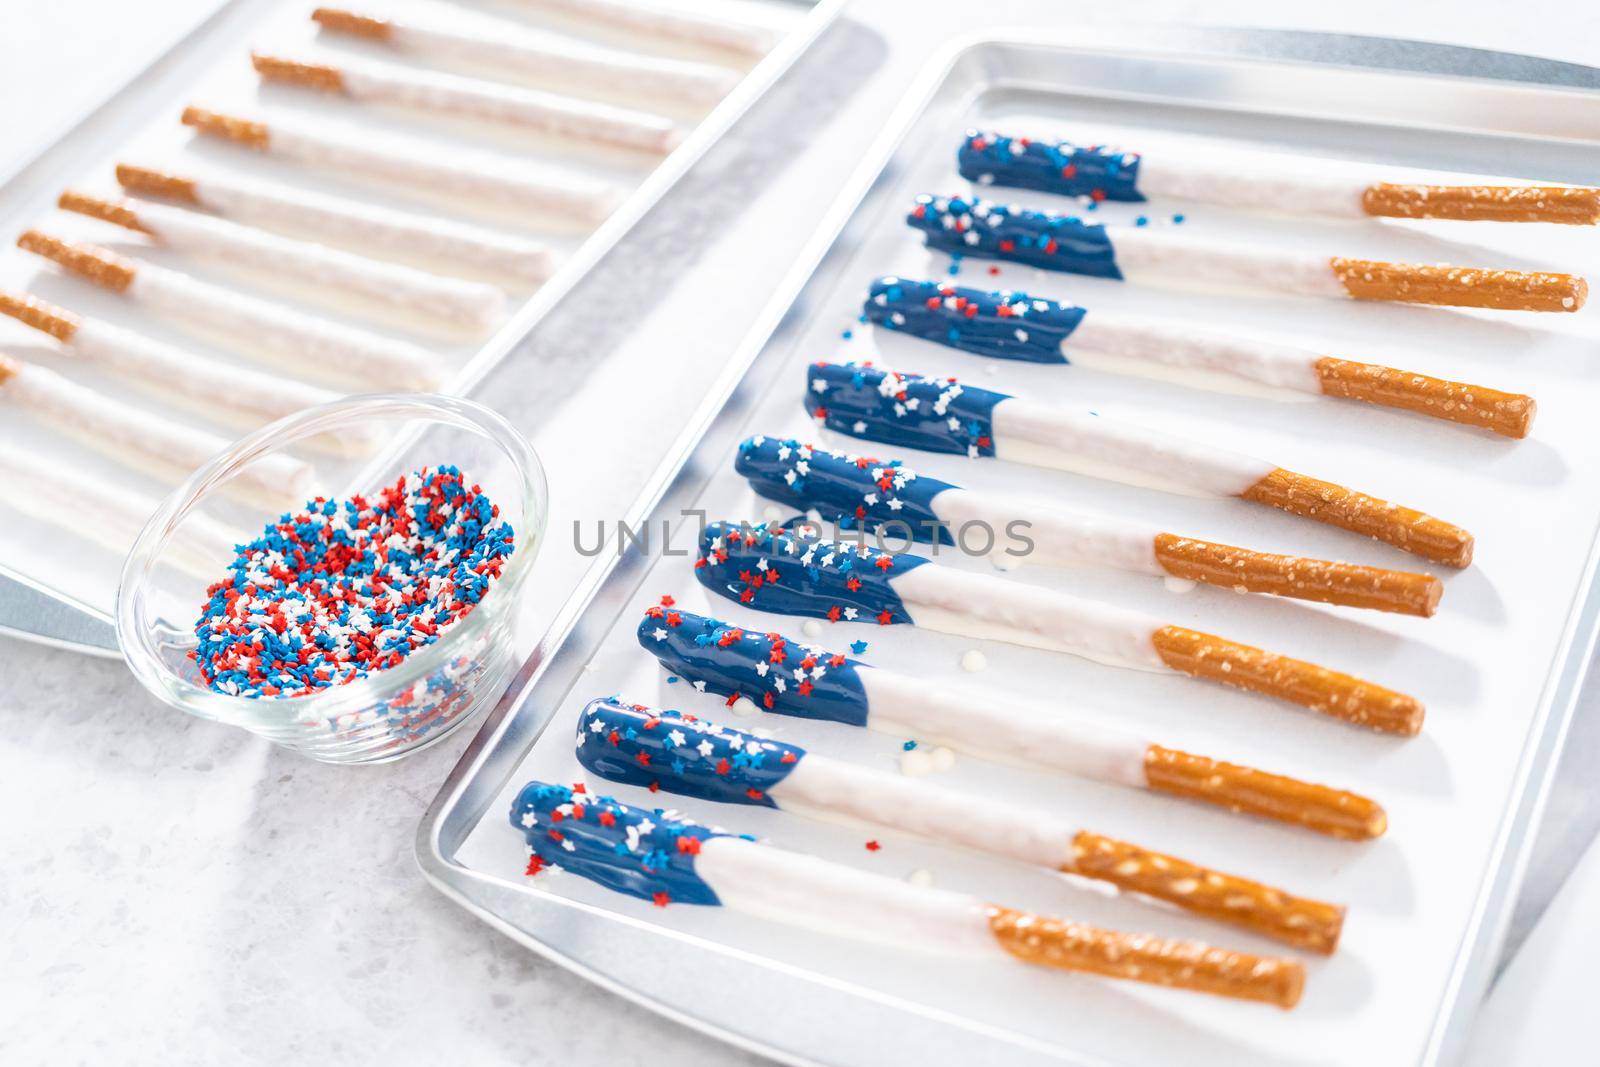 Dipping pretzel rods into the melted chocolate to prepare chocolate dipped pretzel rods for the July 4th celebration.